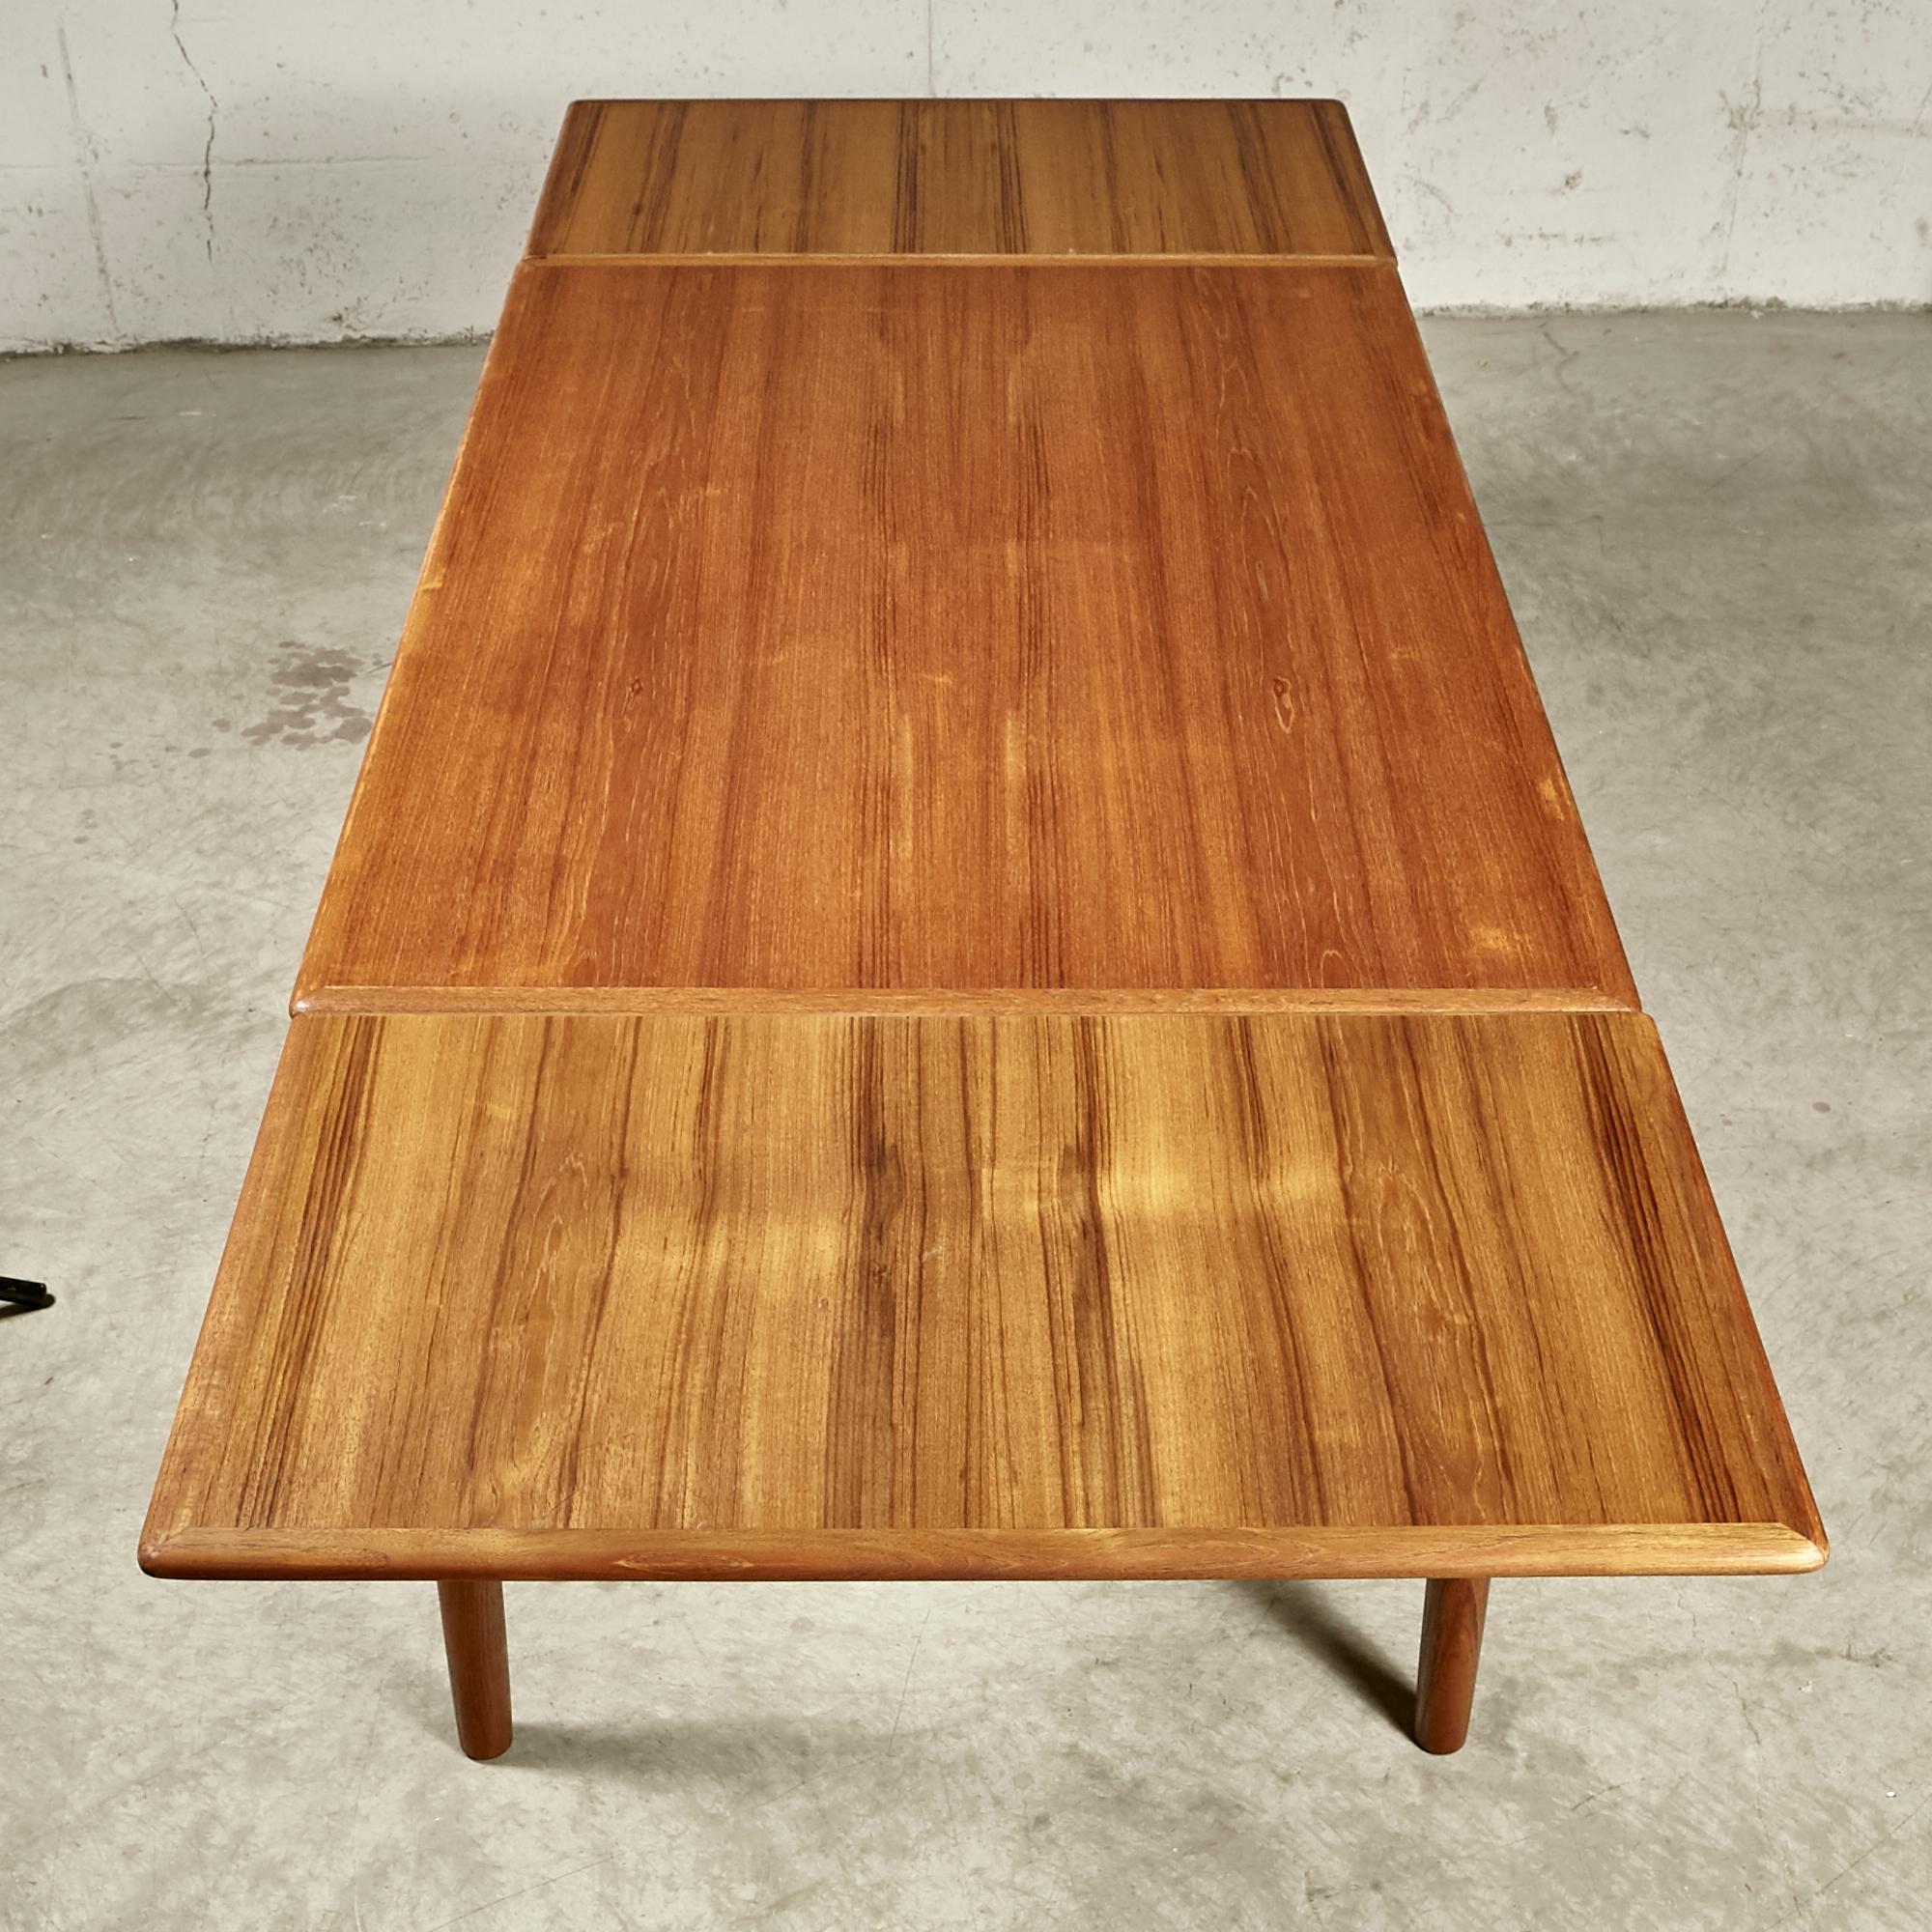 20th Century Danish Teak Expandable Dining Room Table For Sale